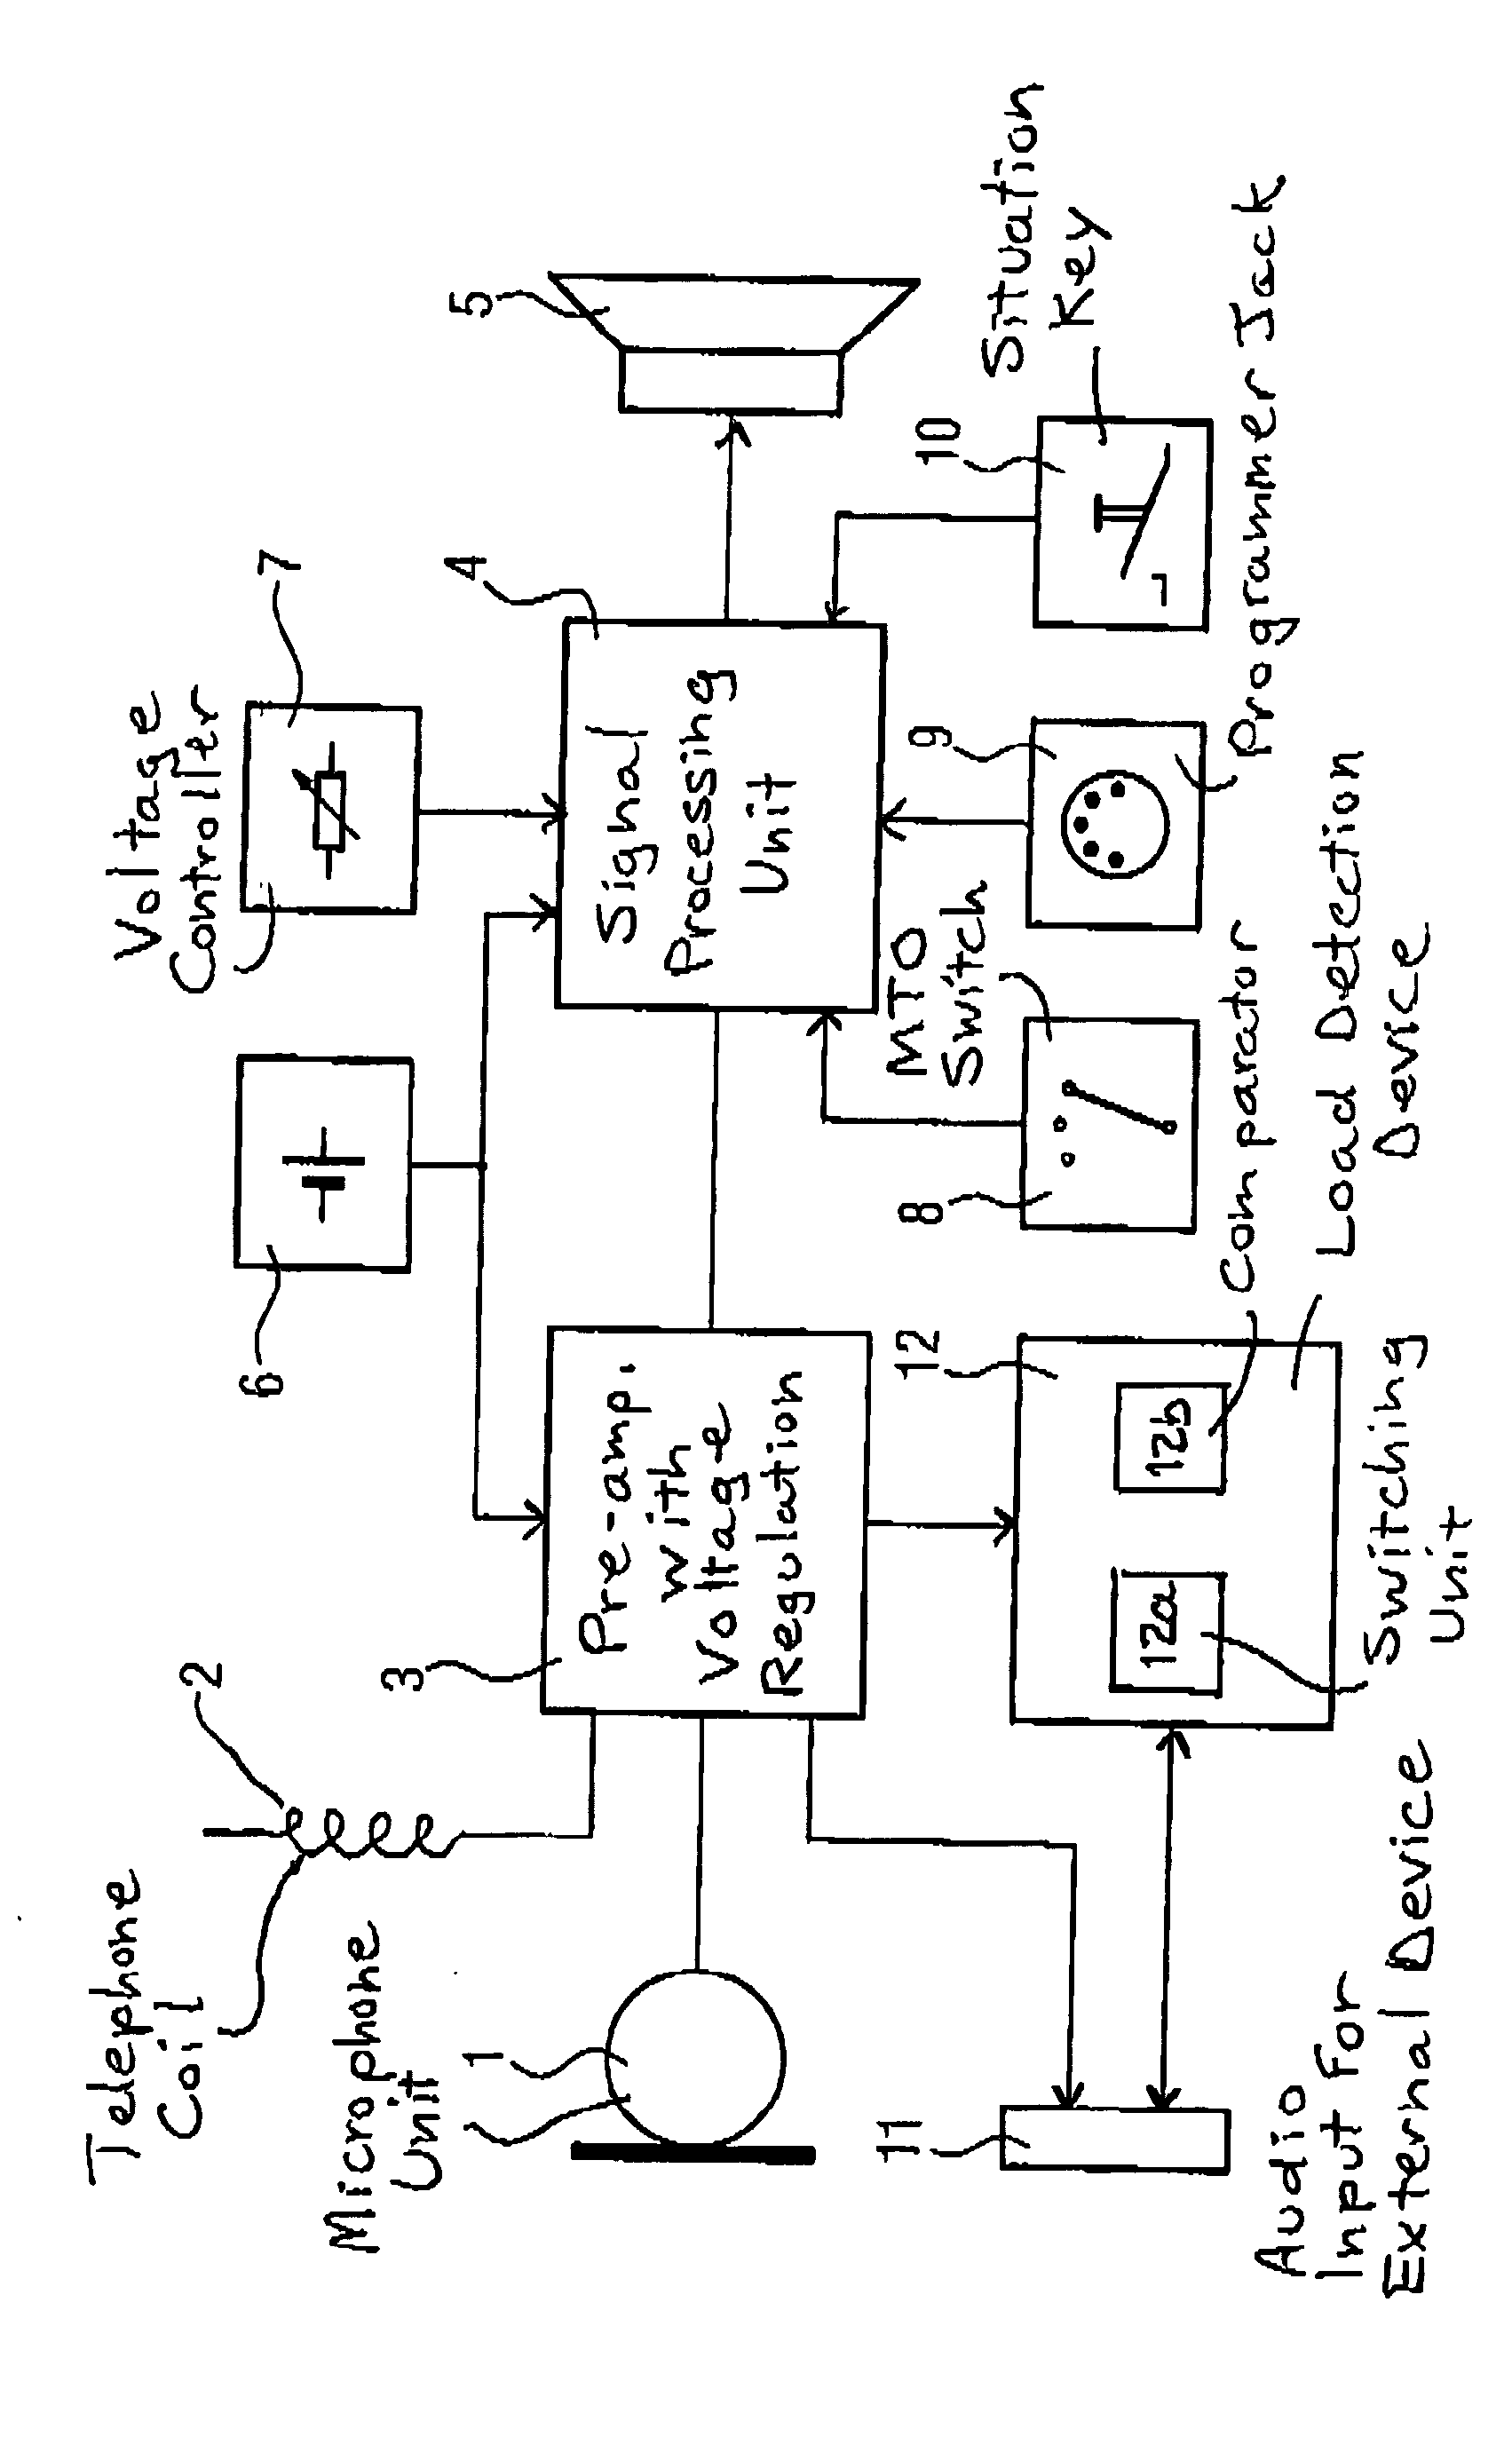 Hearing aid device and operating method for automatically switching voltage supply to a connected external device